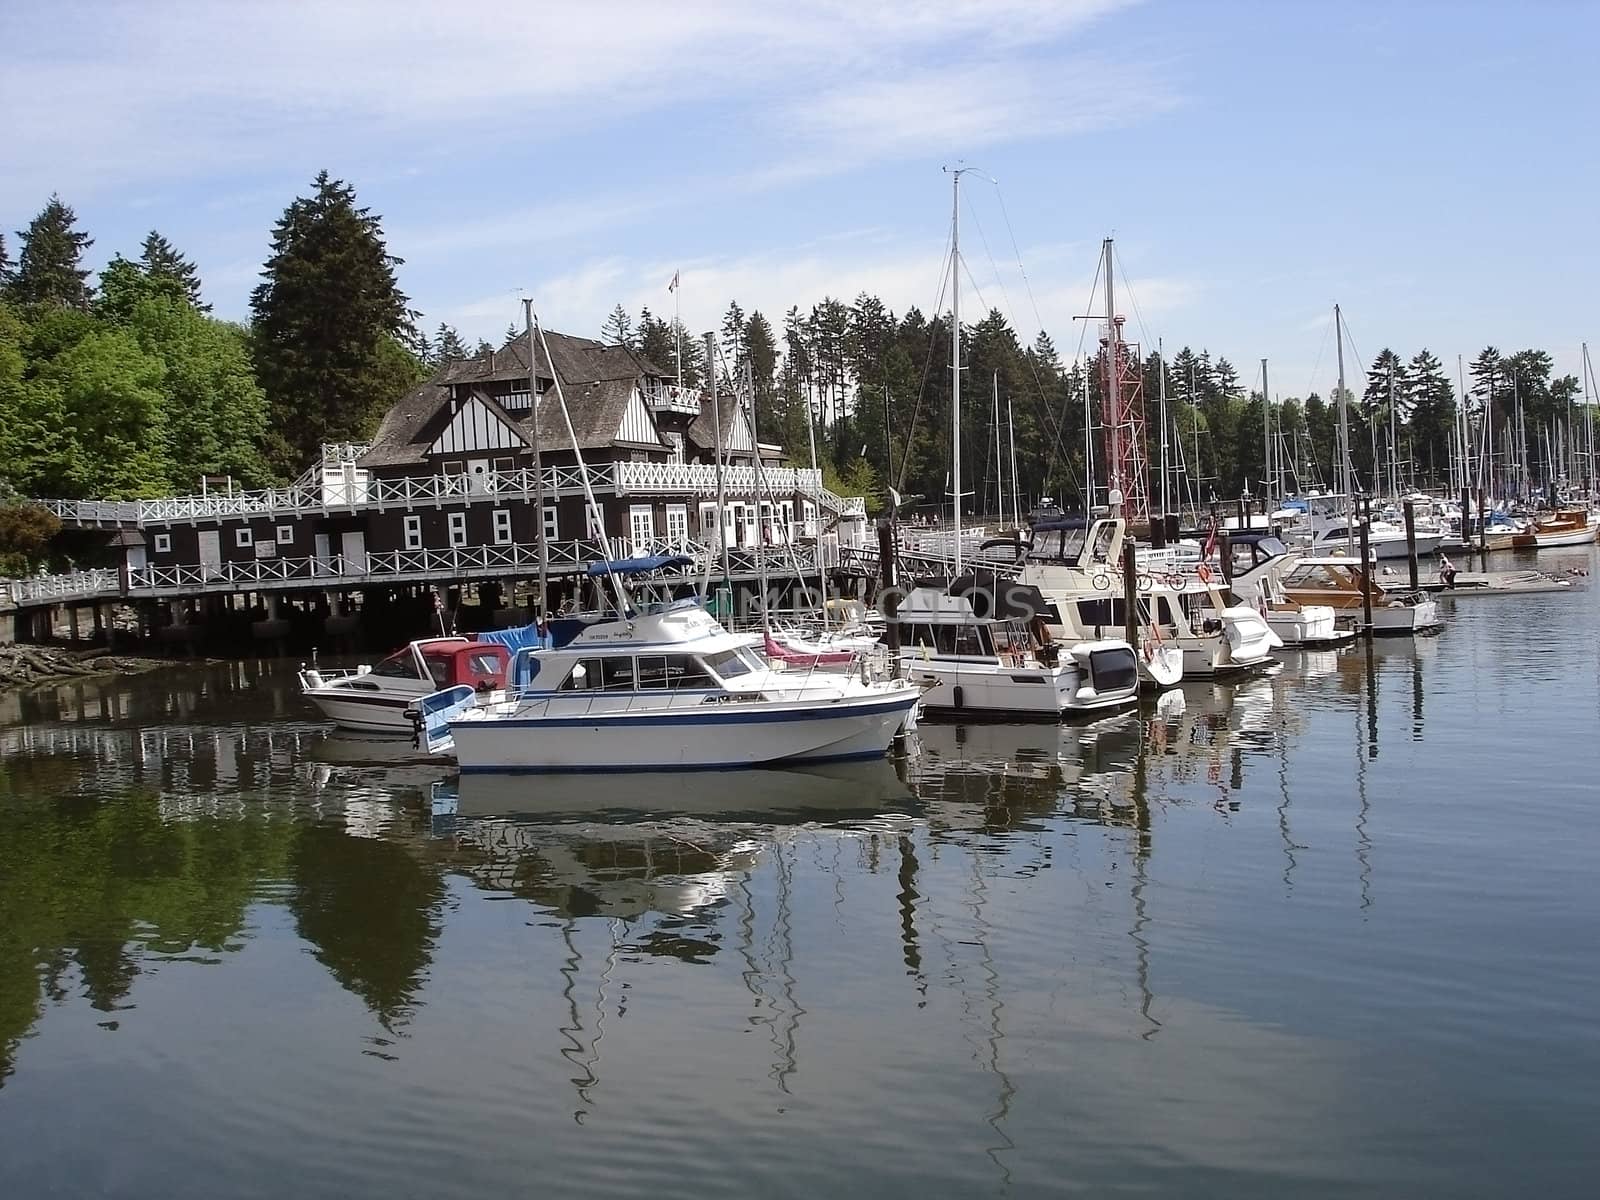 Boats And Yachts Docked In Stanley Park Vancouver British Columbia Canada.